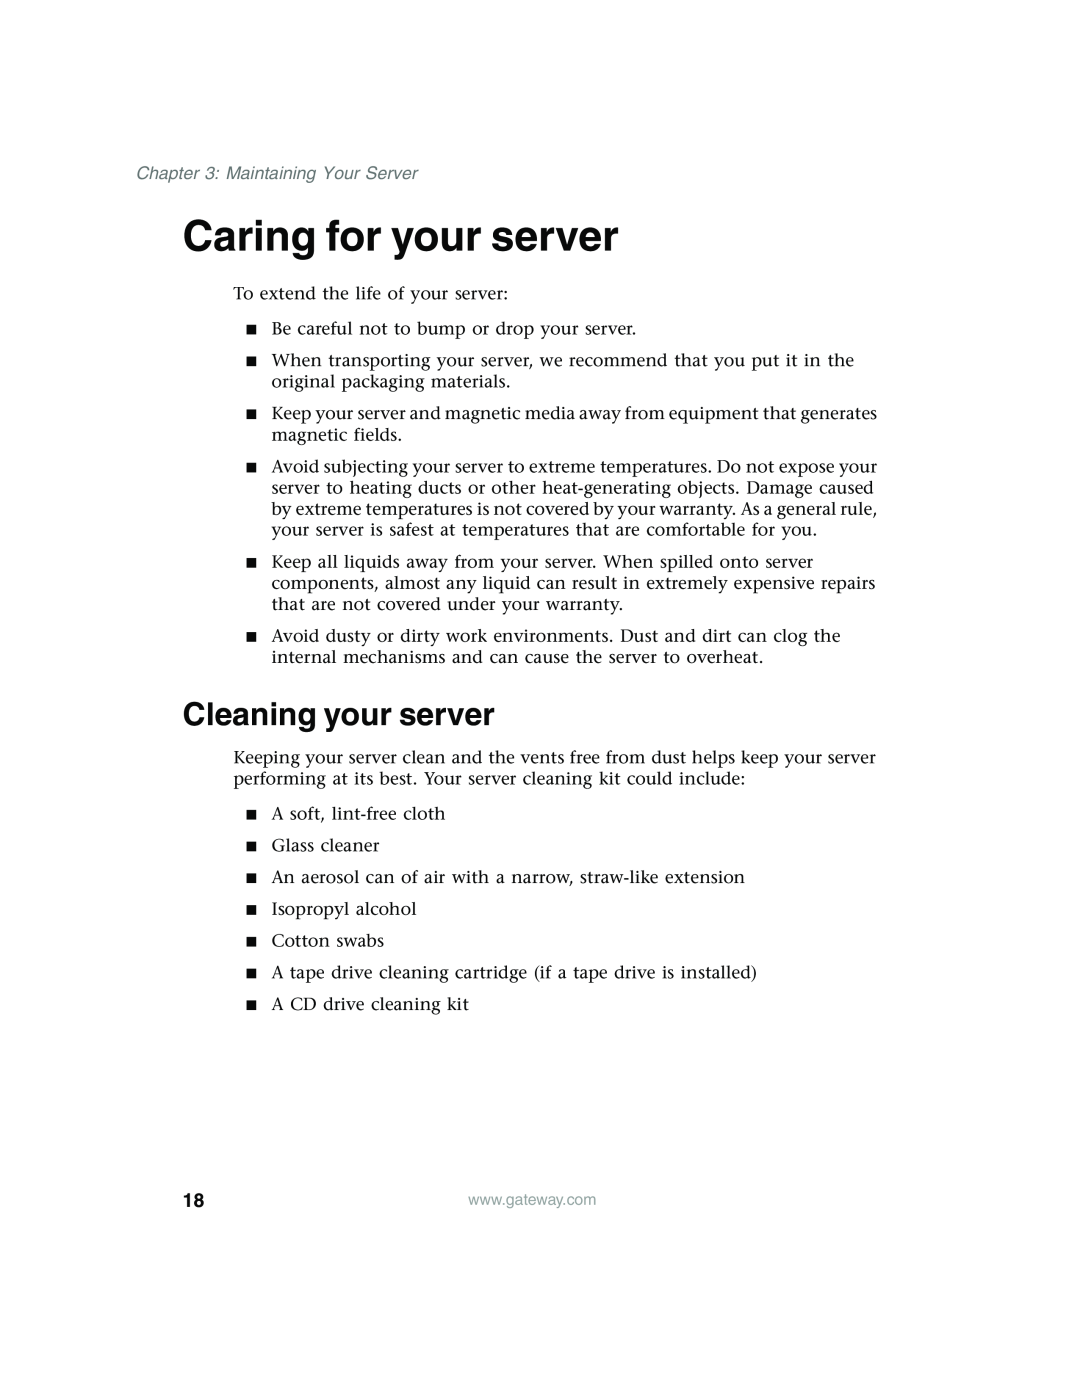 Gateway 980 manual Caring for your server, Cleaning your server, Maintaining Your Server 